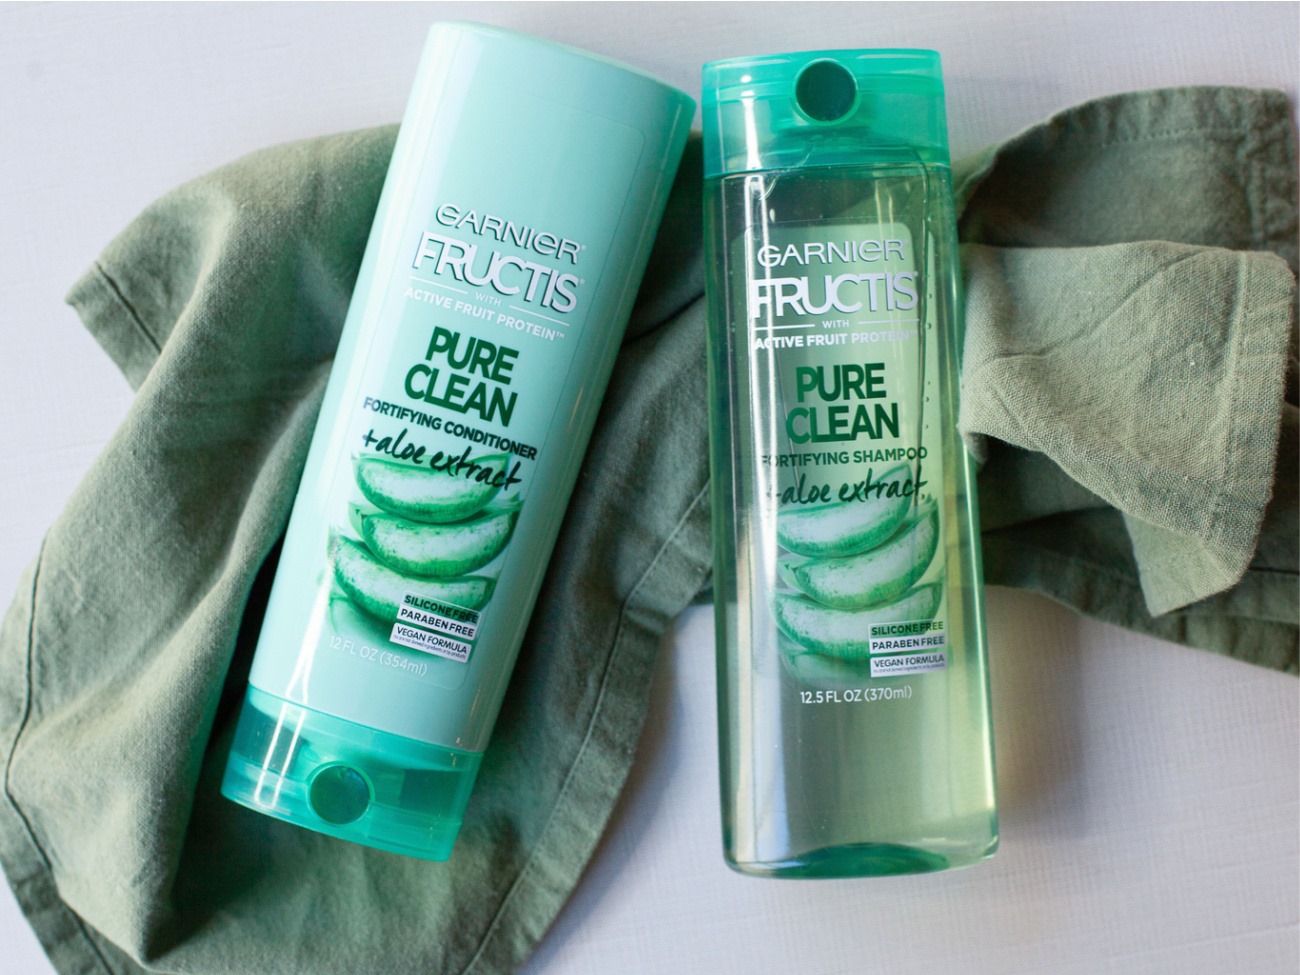 Garnier Fructis Products As Just 79¢ At Kroger